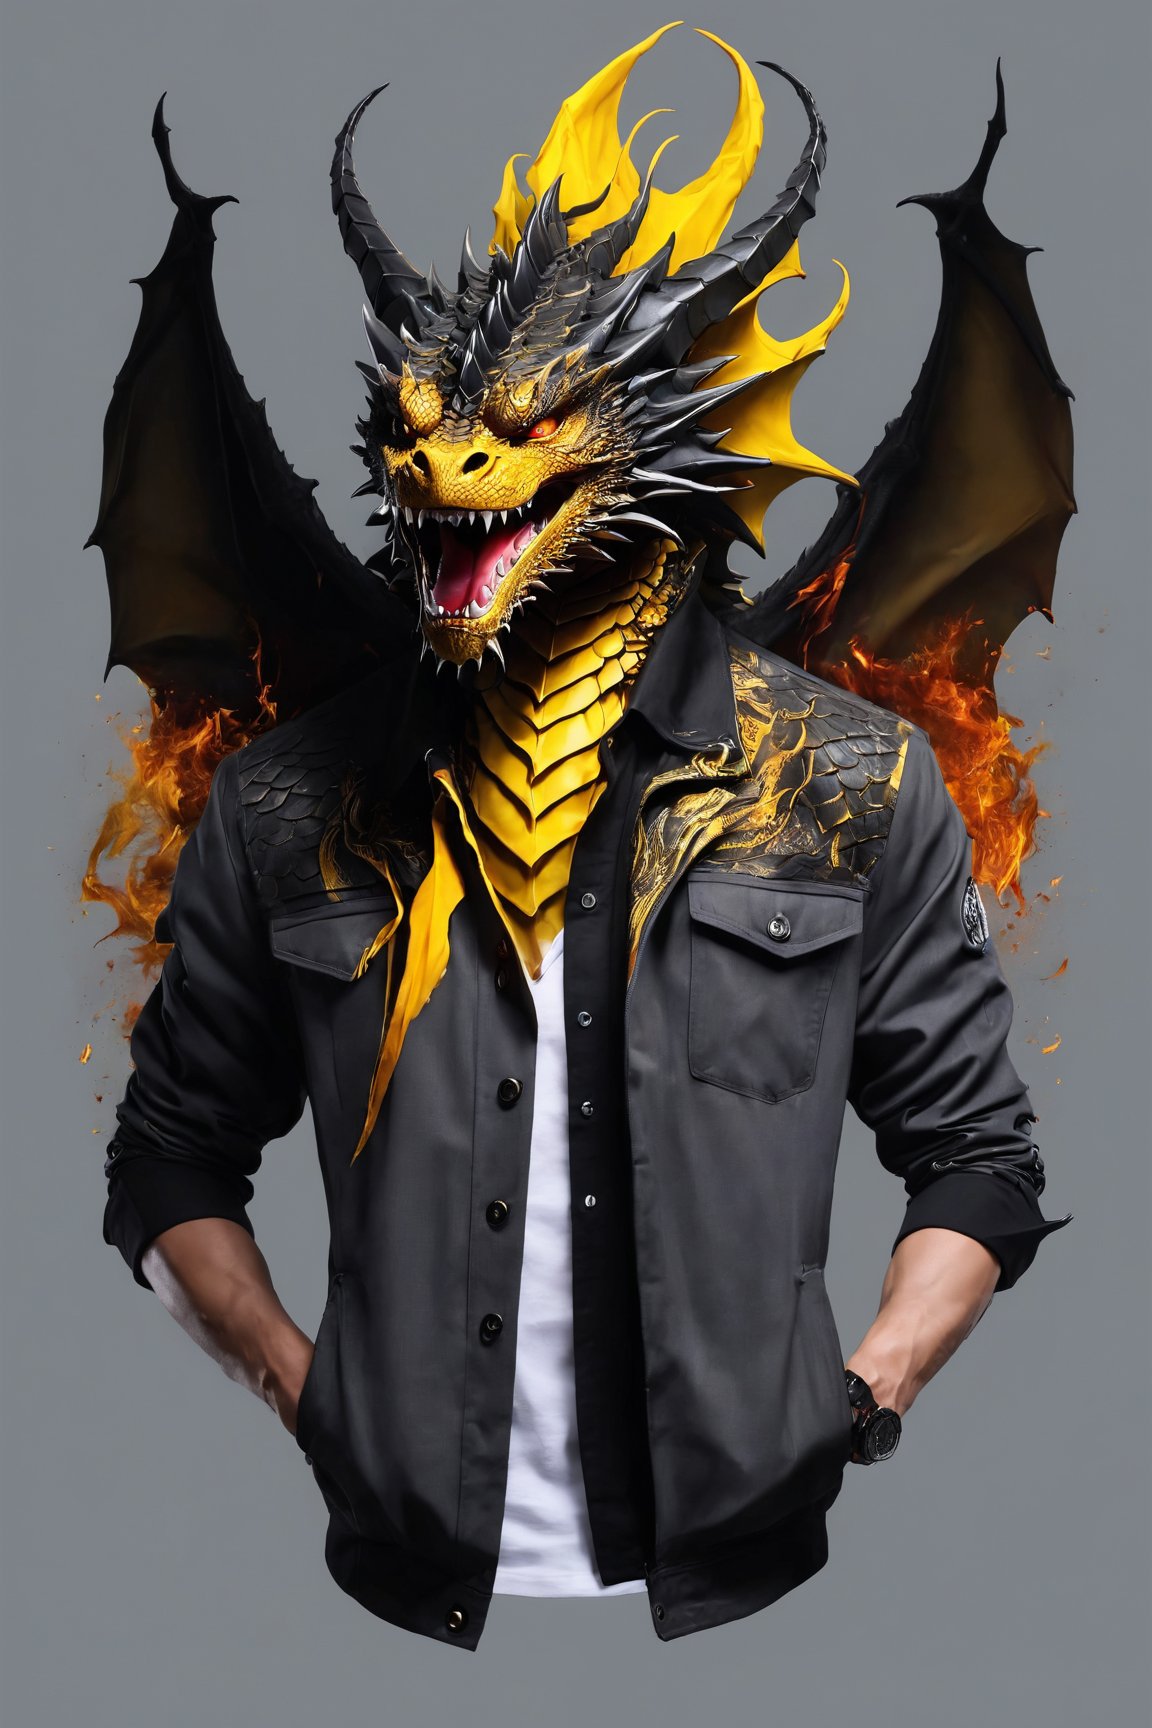 AiArtV, Dragon, open mouth, yellow eyes, shirt design, jacket, upper body, male focus, teeth, grey background, sharp teeth, t-shirt, claws, spikes, yellow shirt, cropped torso, scales, fiery breath, intense gaze, powerful wings, smoky atmosphere